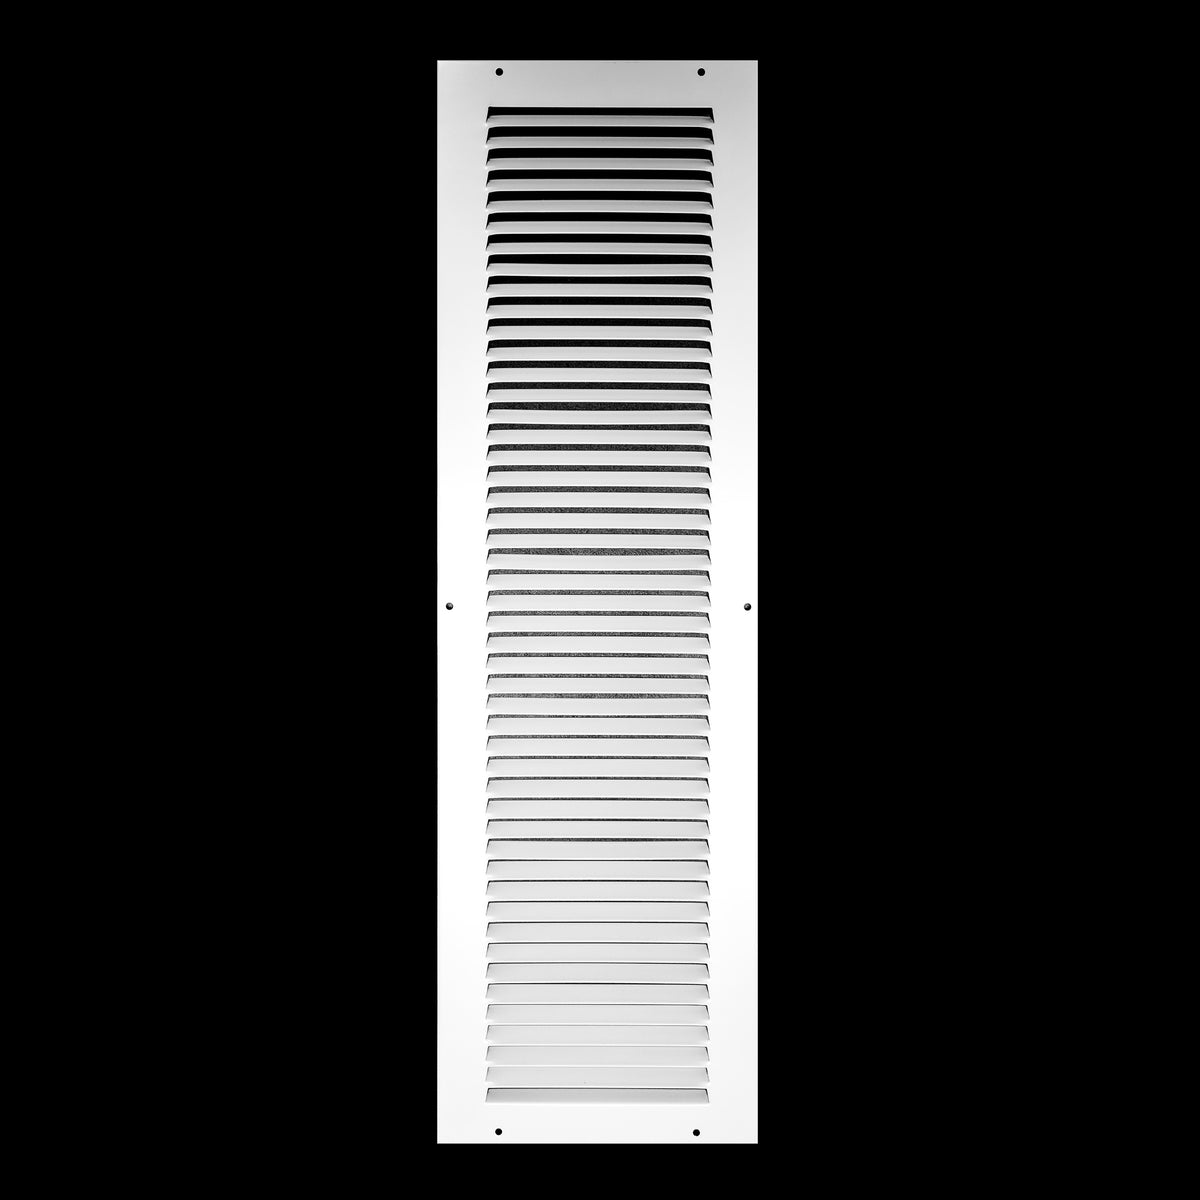 airgrilles 6" x 24" duct opening steel return air grille for sidewall and ceiling hnd-flt-1rag-wh-6x24 038775628617 1